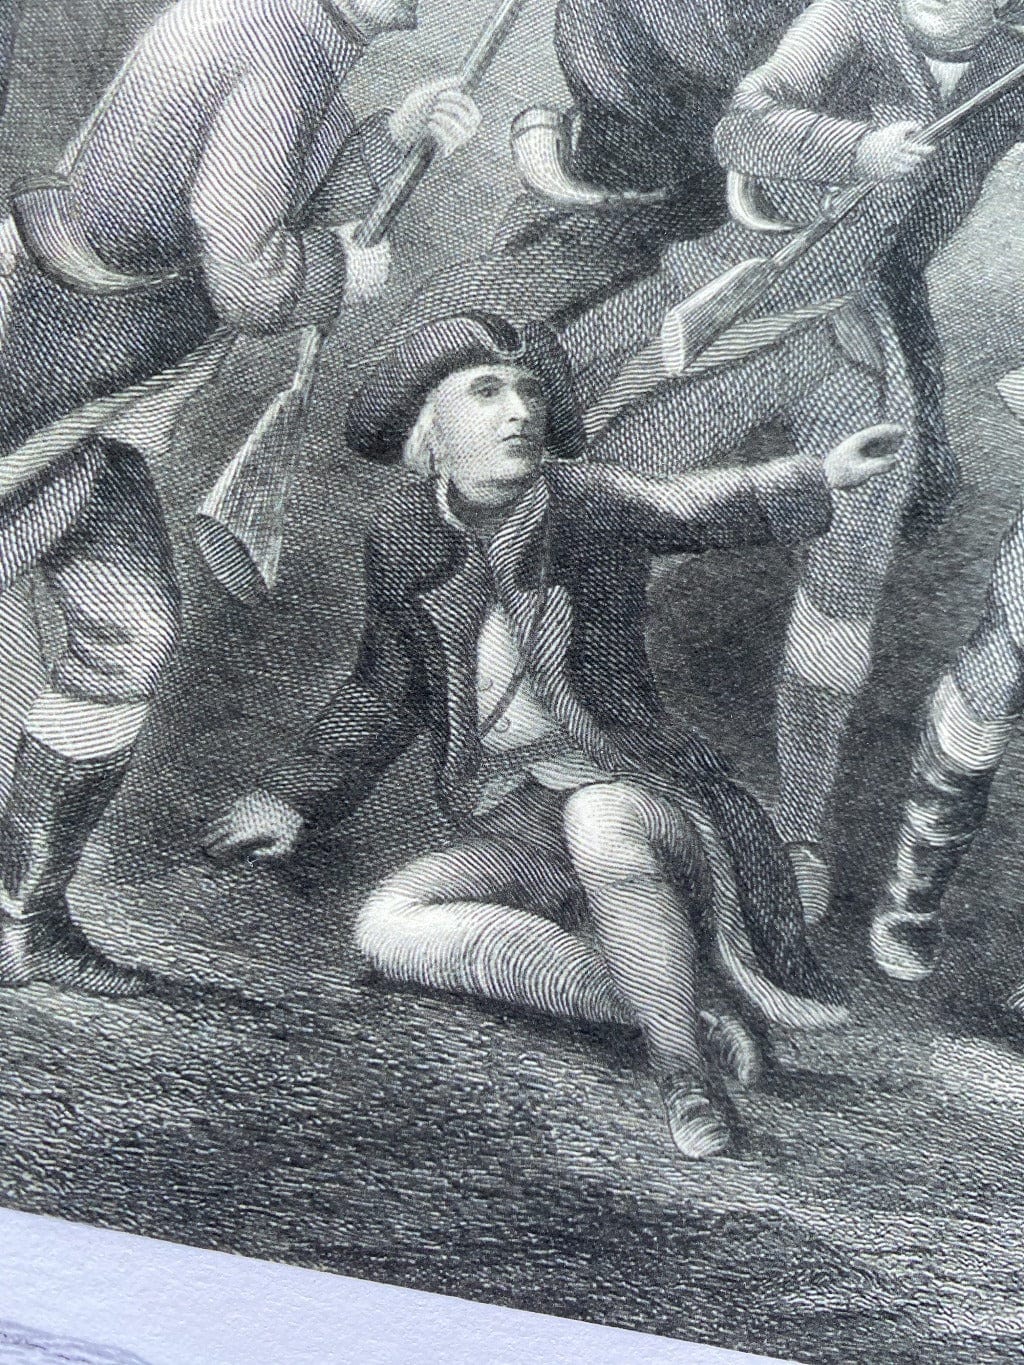 Closeup print on cotton rag of the "Battle of Lexington 1775" Archival print from the History list store